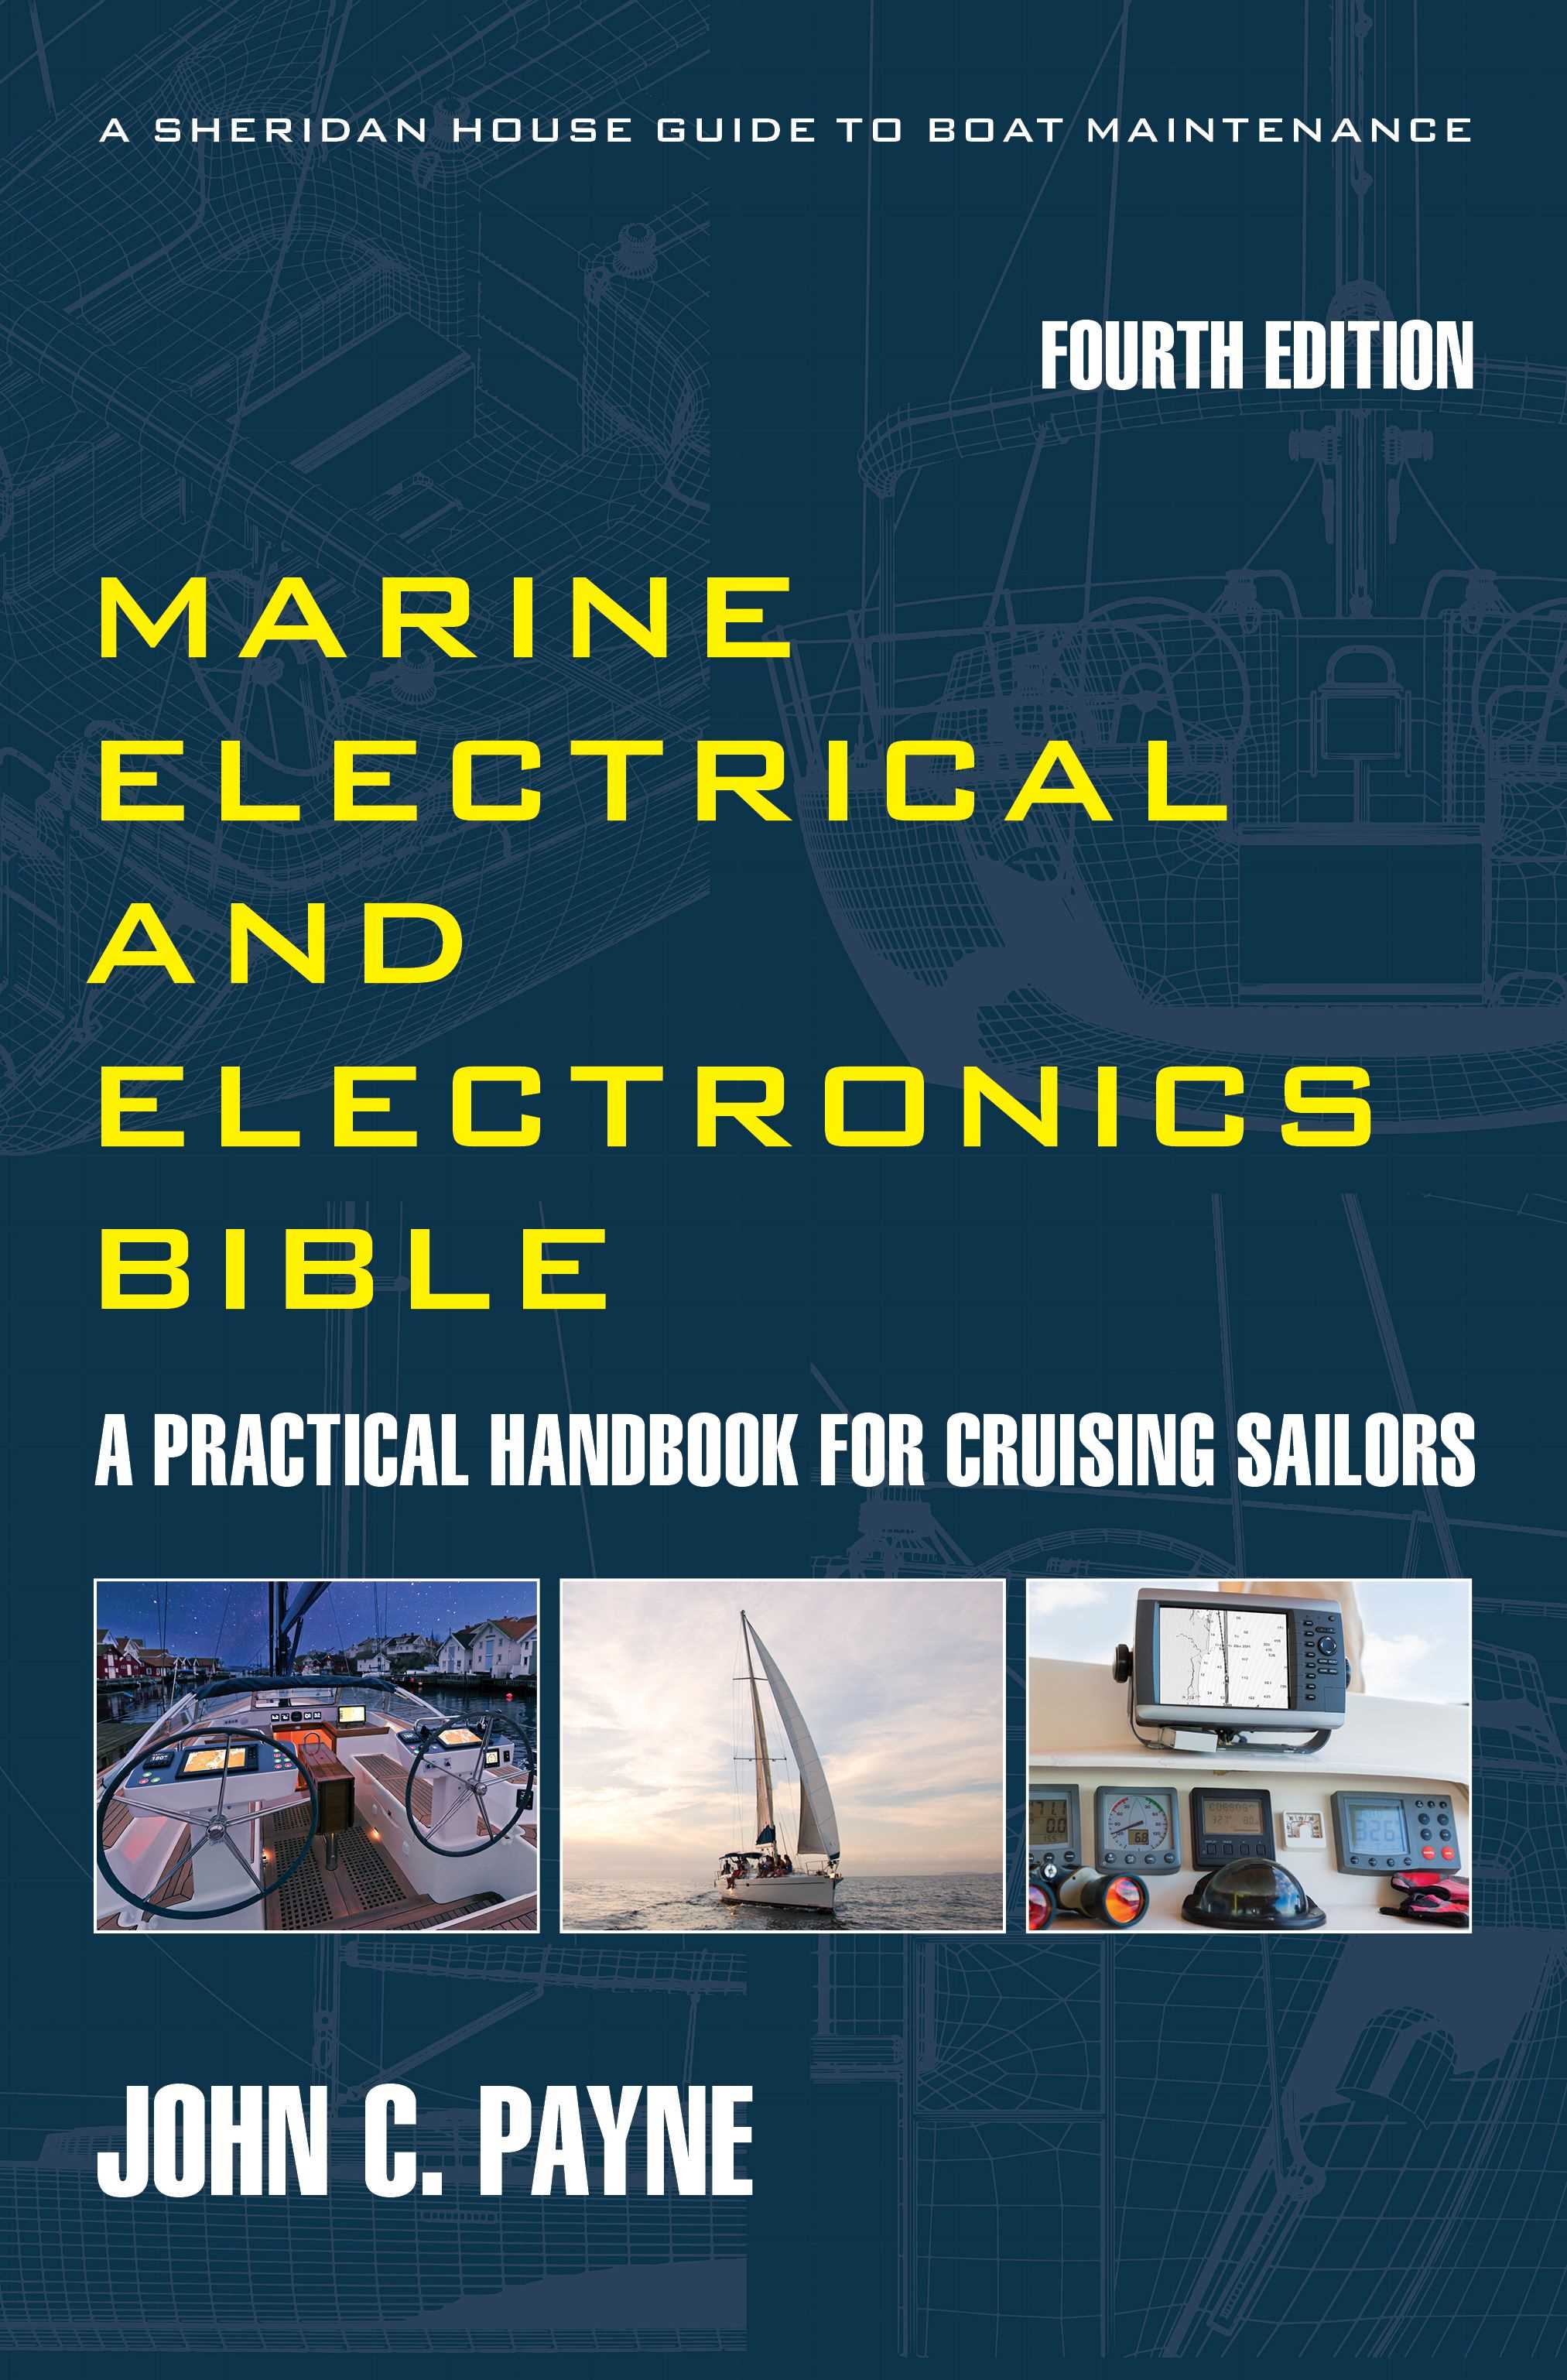 The Marine Electrical and Electronics Bible, a practical reference guide for cruising yachts